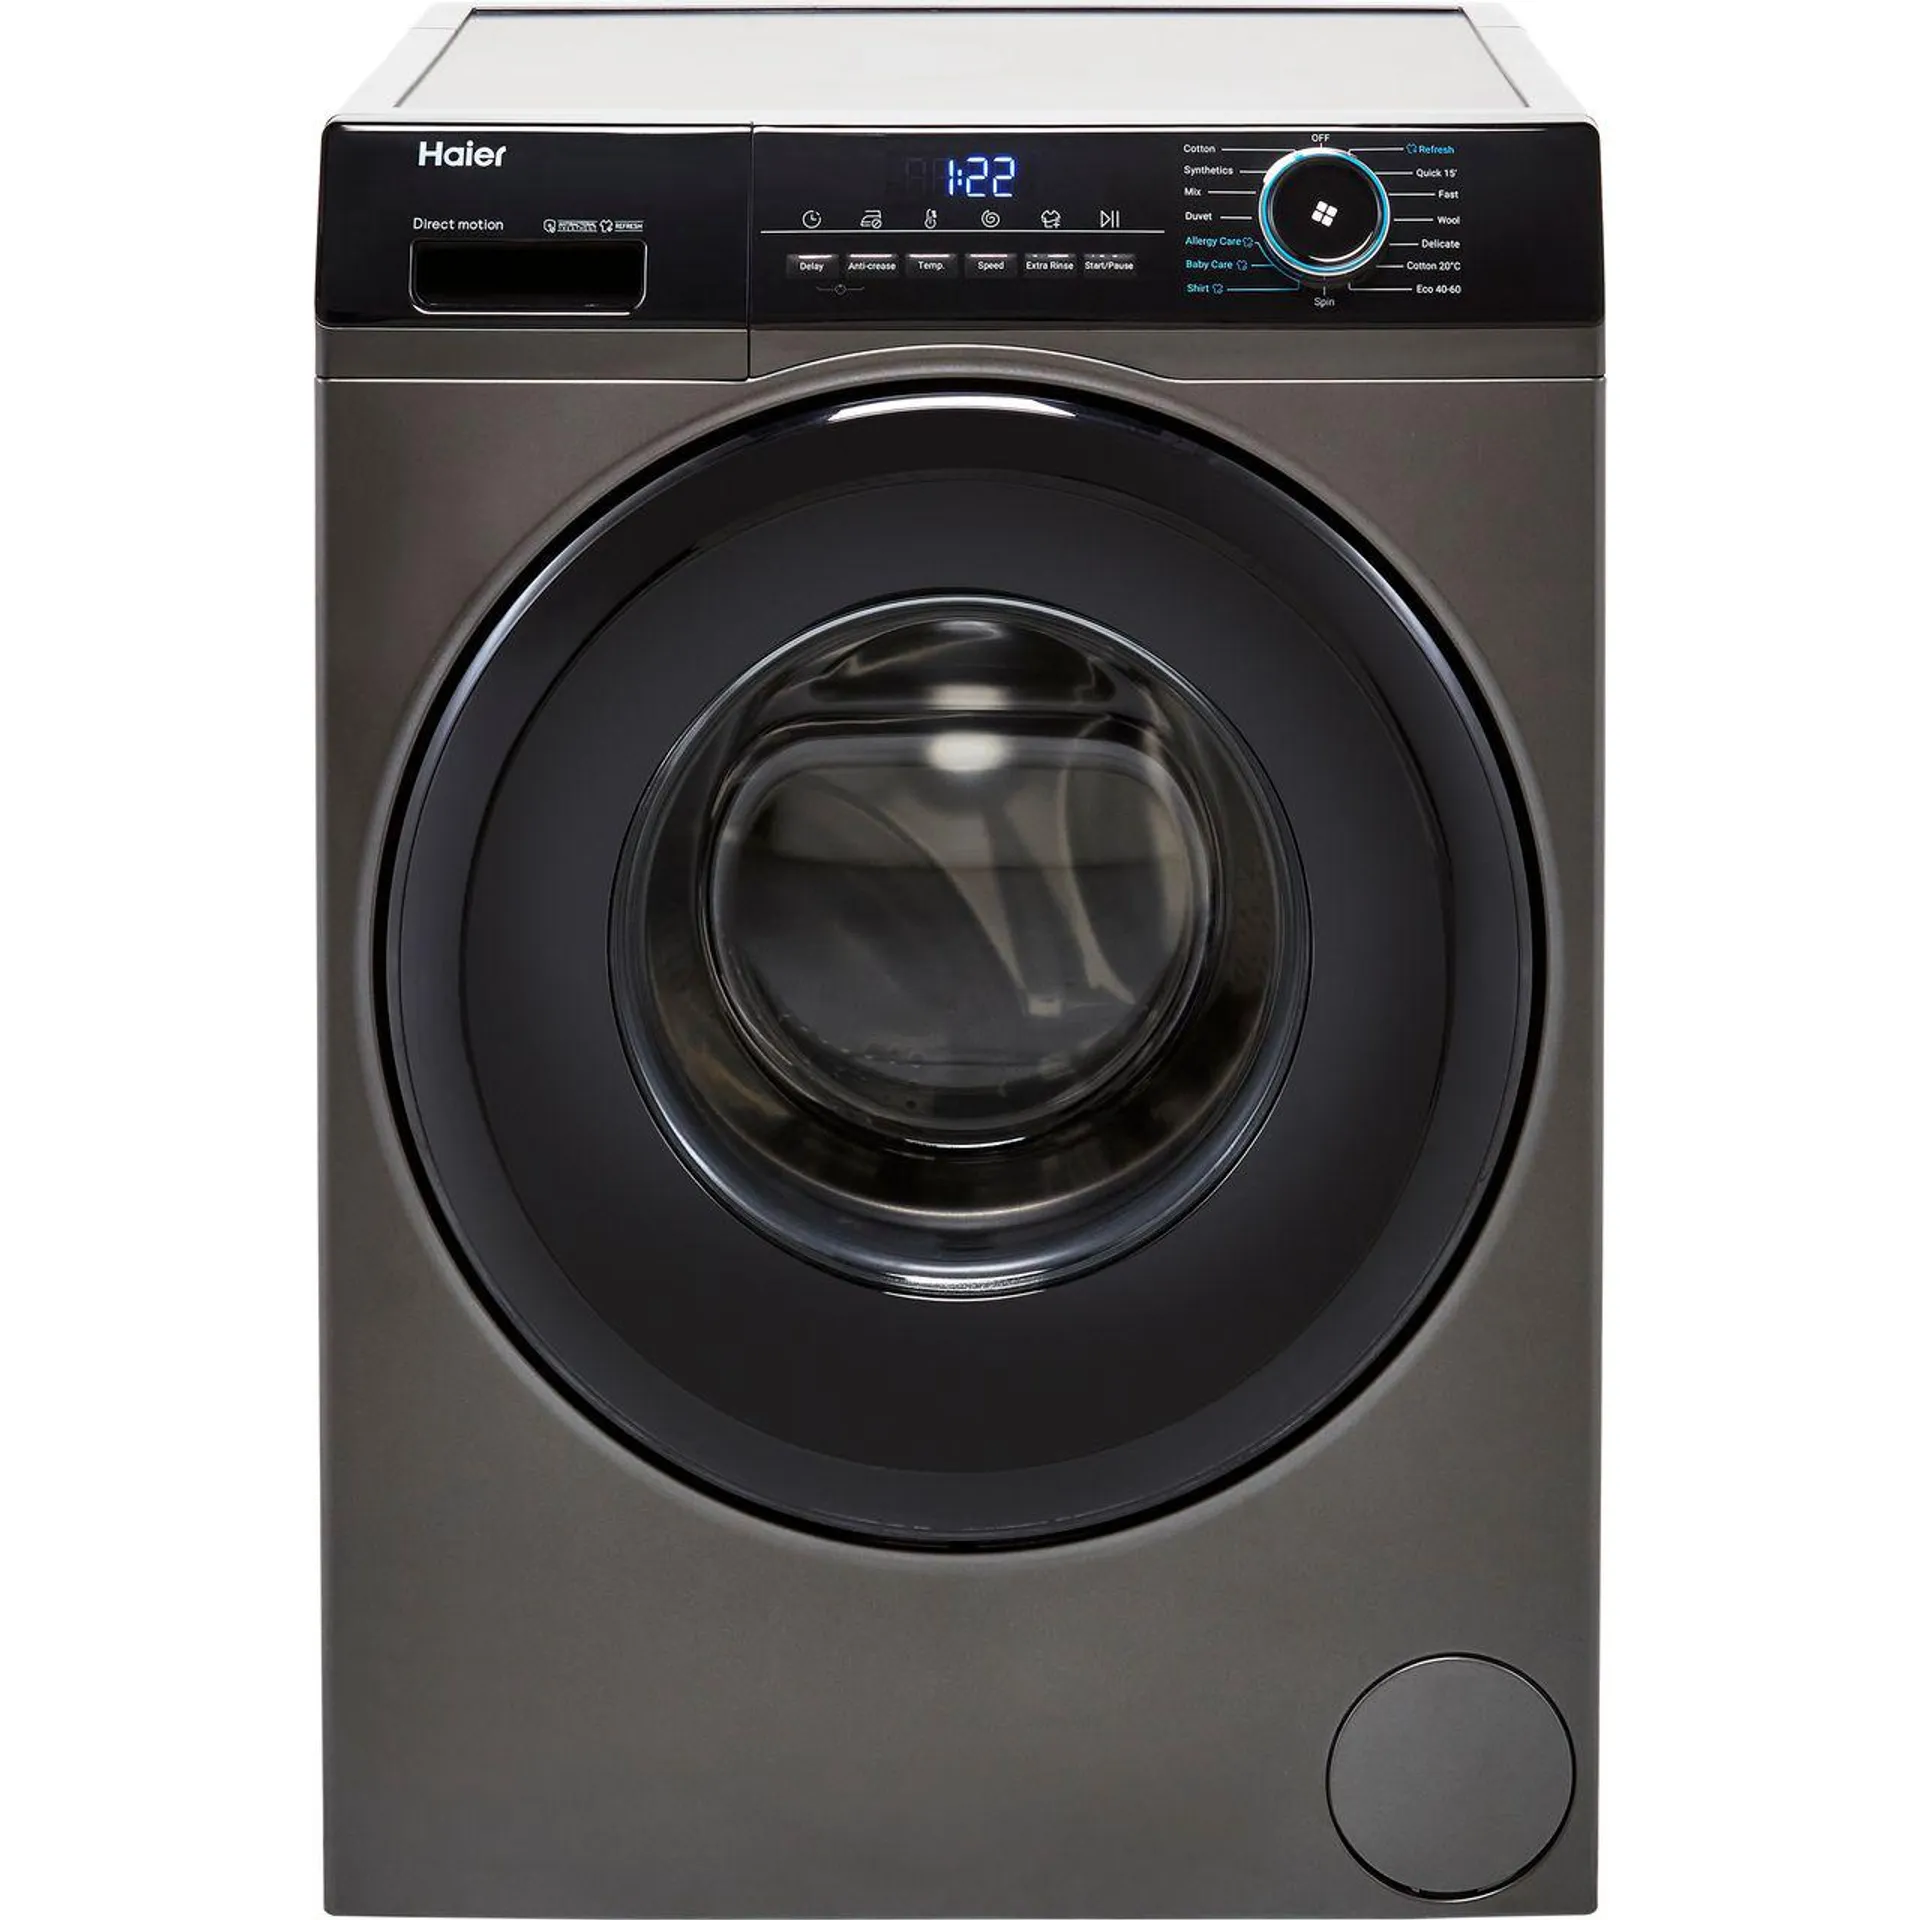 Haier i-Pro Series 3 HW90-B14939S 9kg Washing Machine with 1400 rpm - Anthracite - A Rated